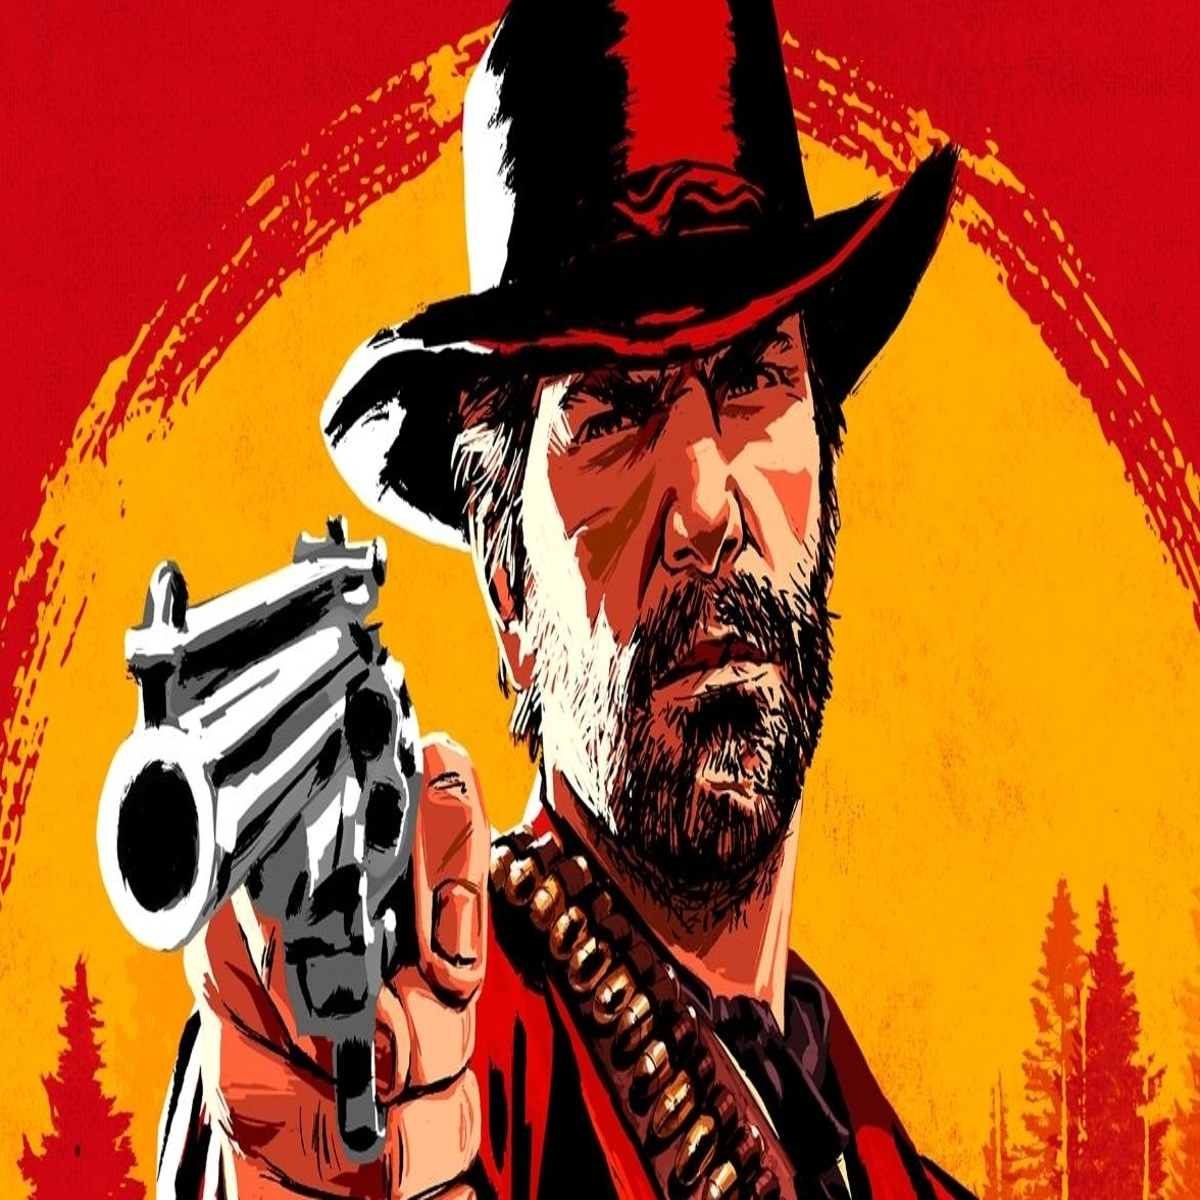 Red Dead Redemption 2': Reaching for Magic on the Shoulders of Indie Games